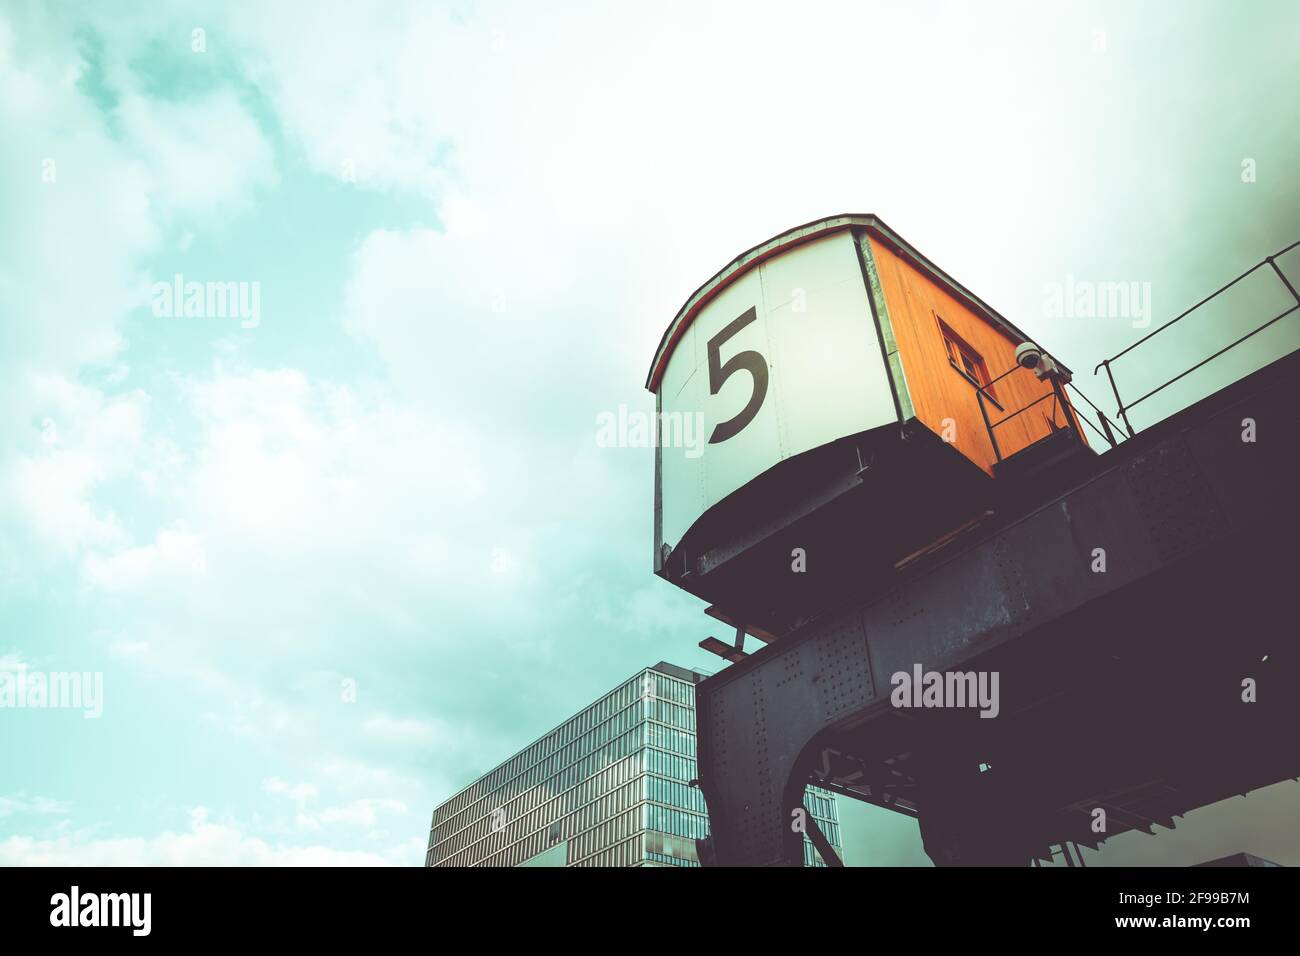 No. 5, crane and attachment with number at the Rheinauhafen in Cologne, Germany, Europe Stock Photo